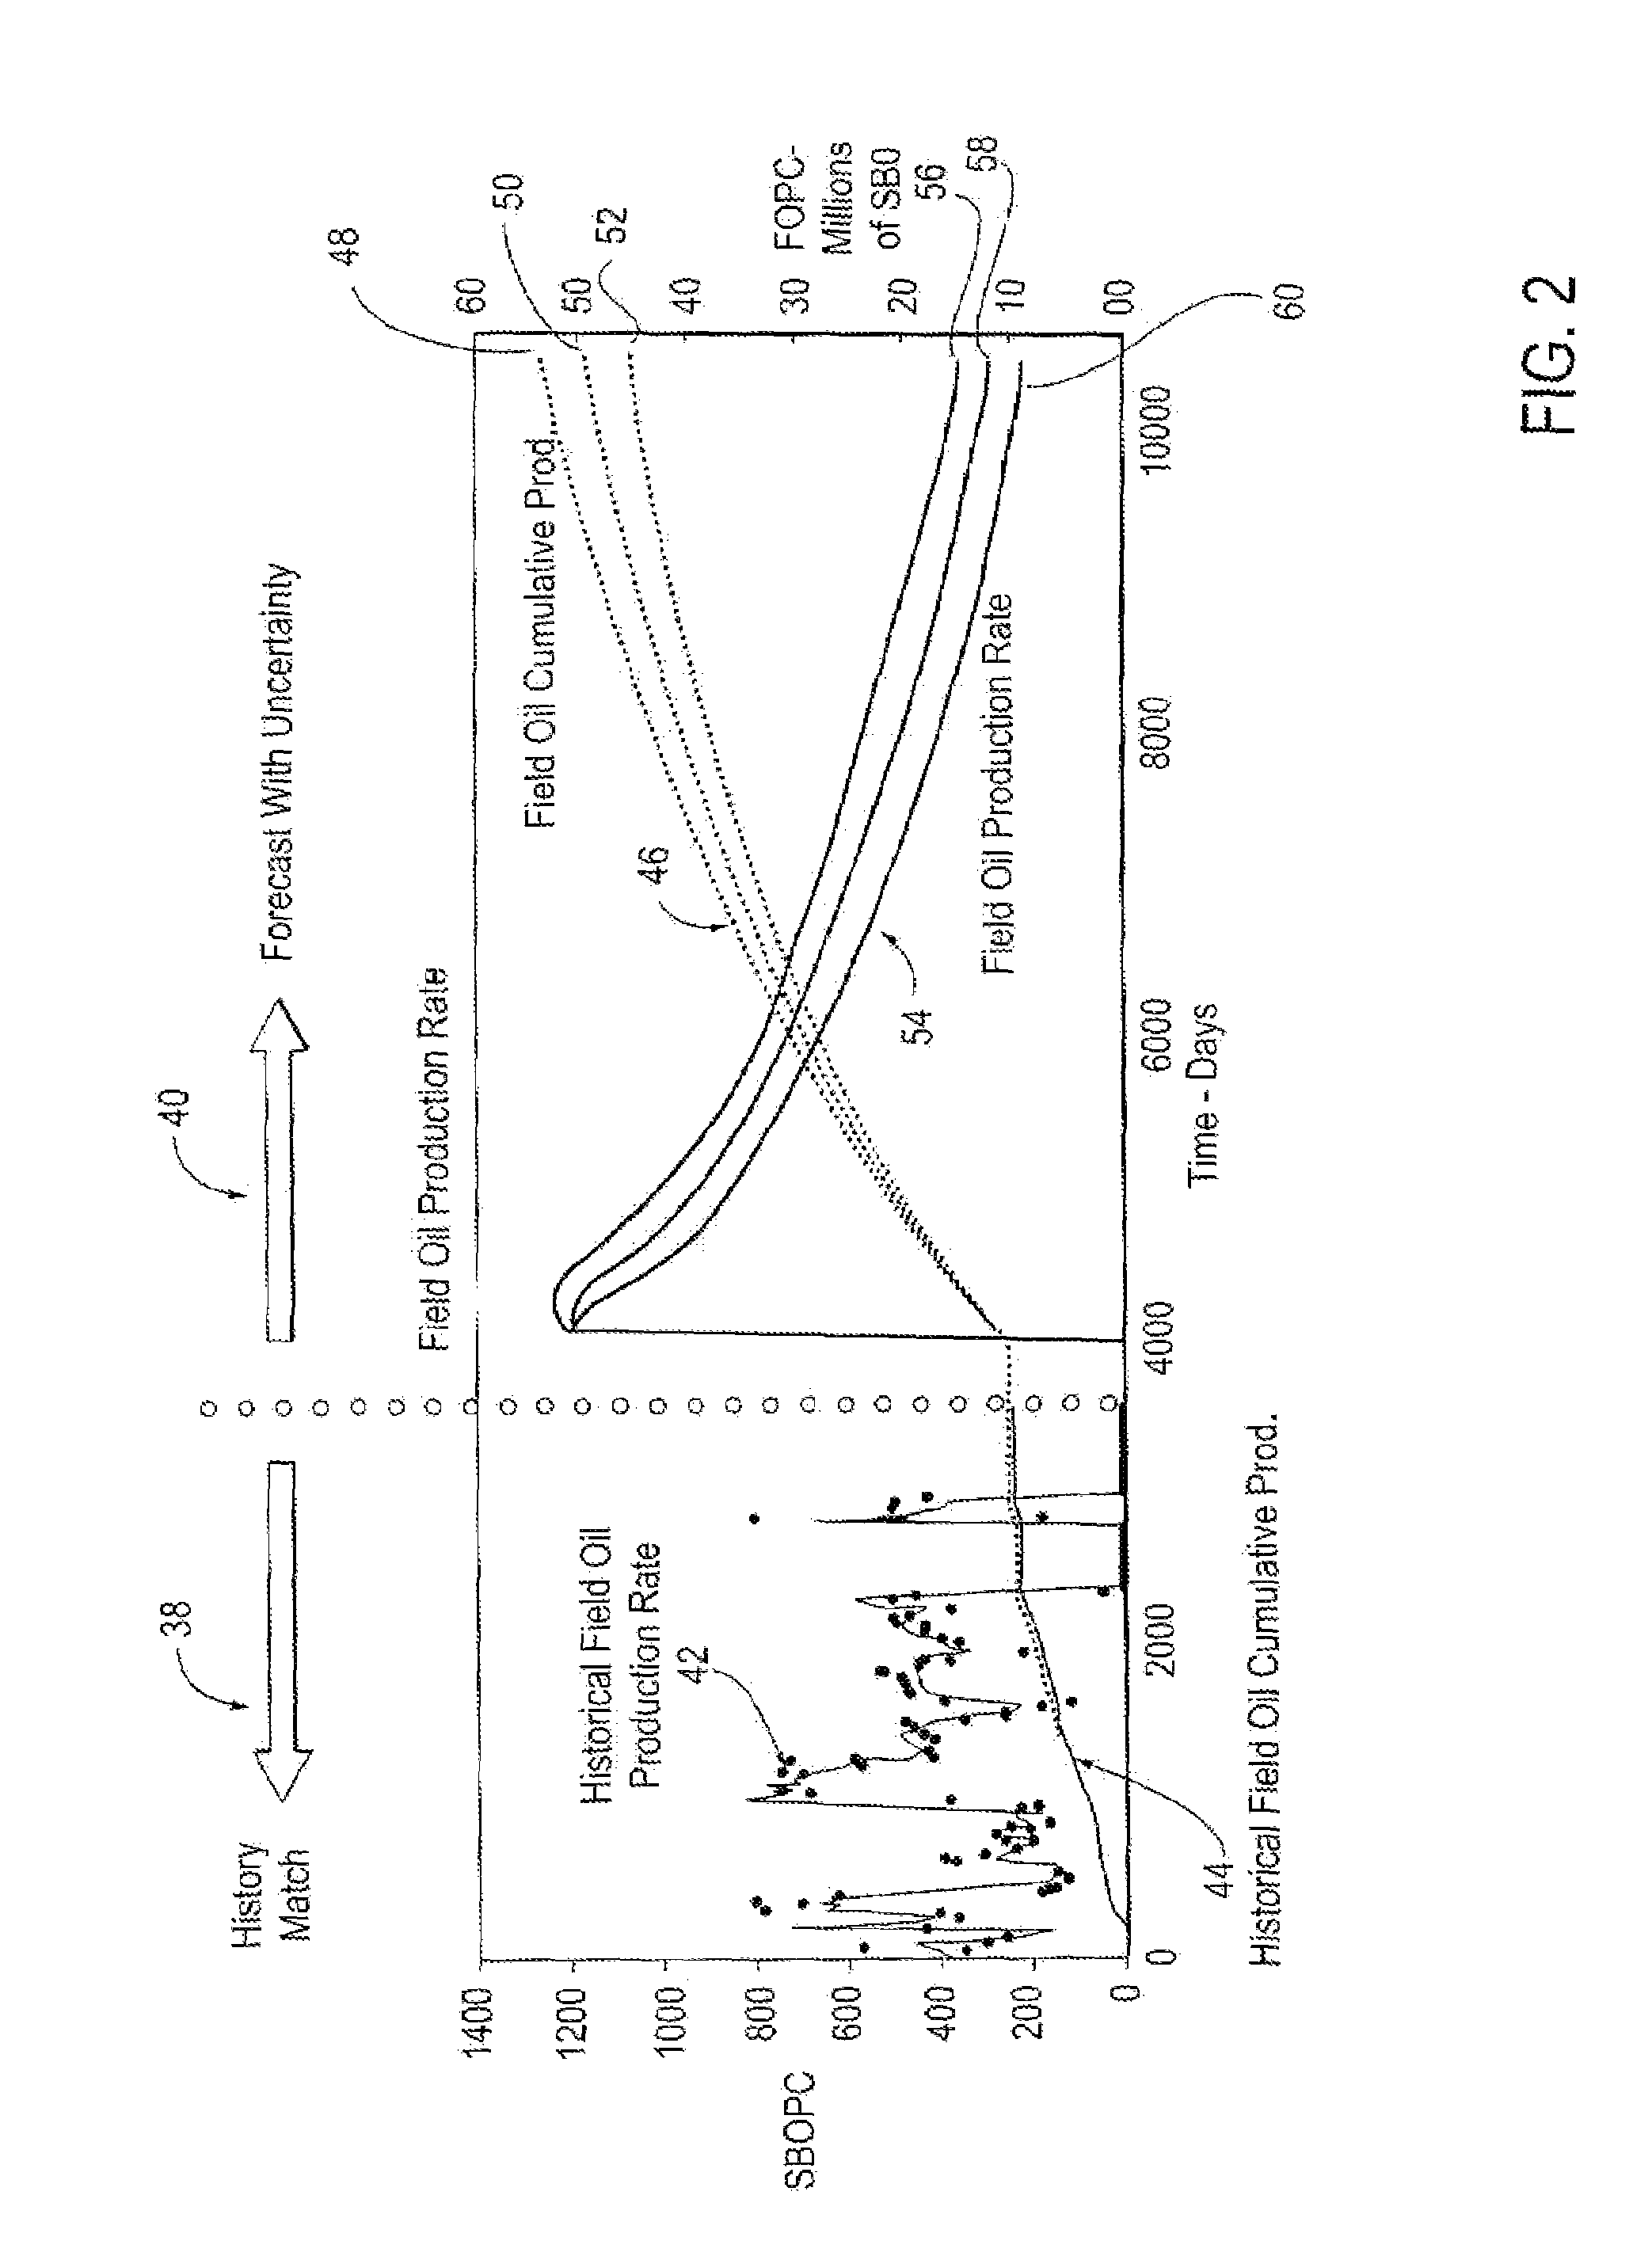 Method for forecasting the production of a petroleum reservoir utilizing genetic programming